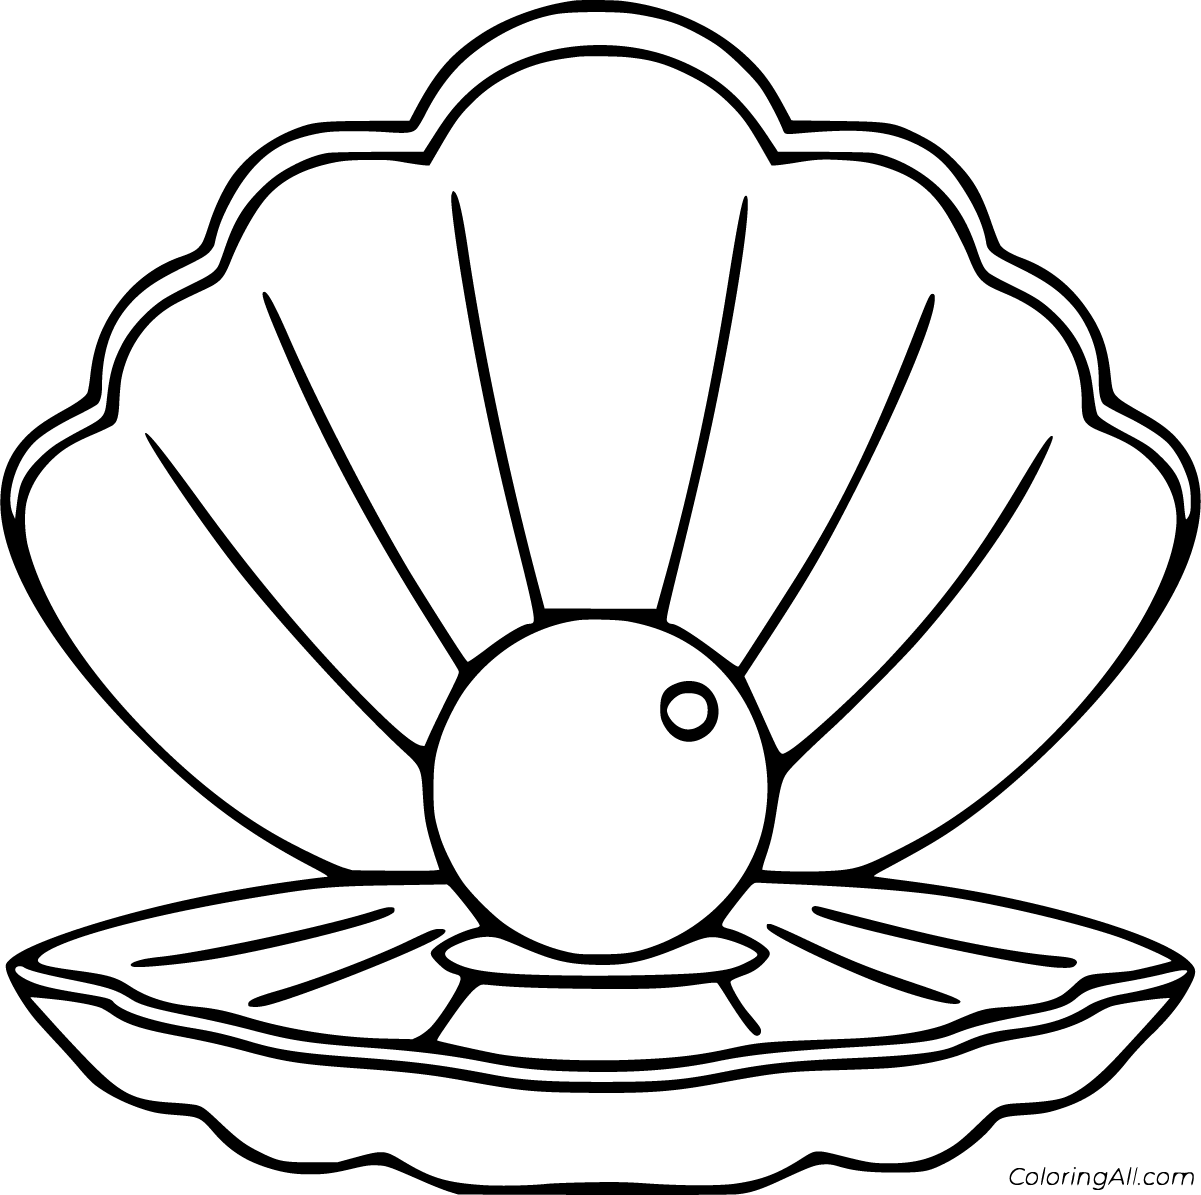 Scallop Coloring Pages - ColoringAll